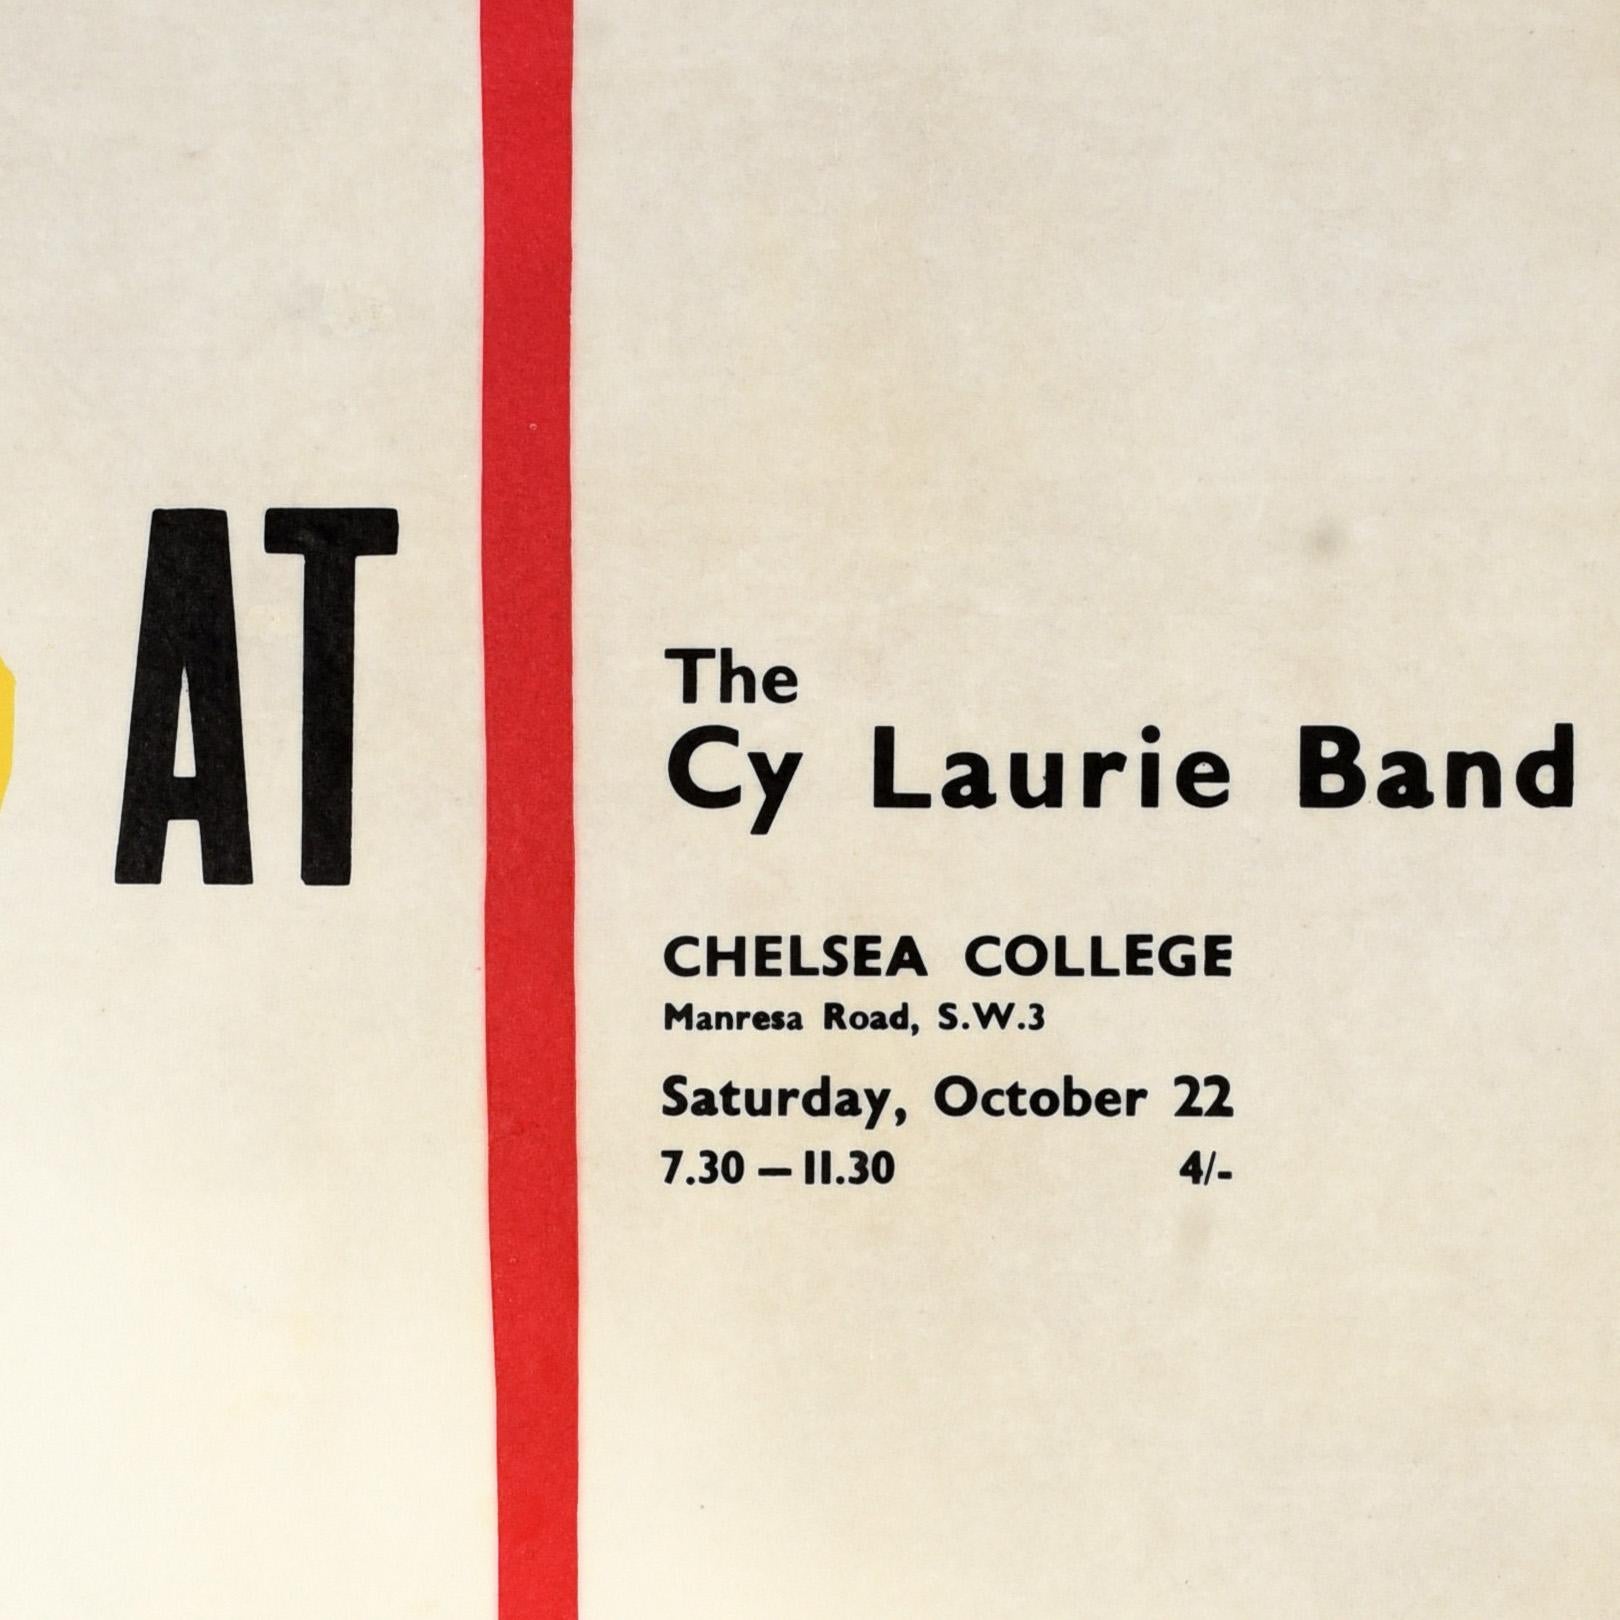 Original vintage music poster advertising Jazz At Chelsea The Cy Laurie Band performing at Chelsea College Manresa Road SW3 from 7:30-11:30 on Saturday 22 October tickets 4/- featuring a great graphic design of a red arrow pointing down and yellow